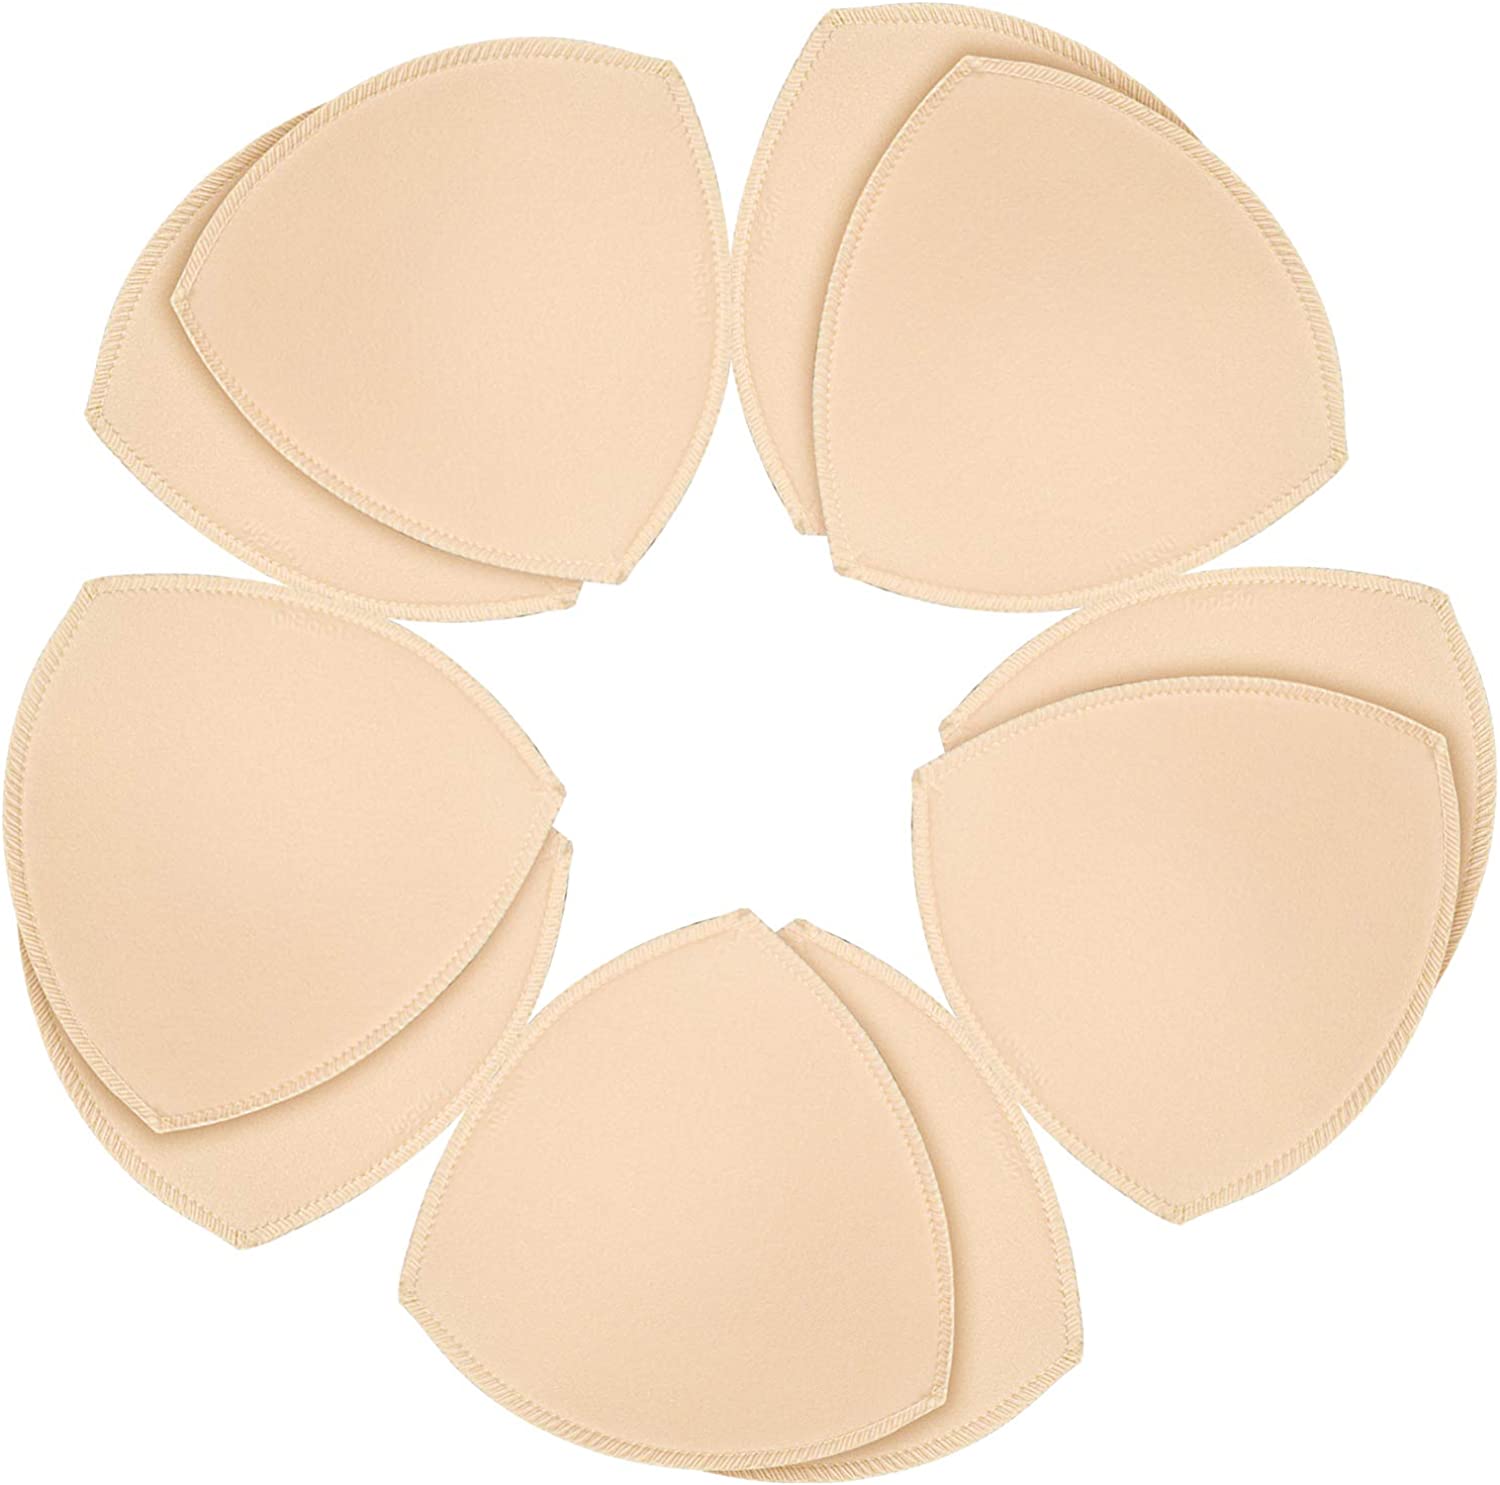 Silicone Bra Inserts And Breast Enhancers, Increase Your Cup Size,  Breathable, Reusable,1 Pair